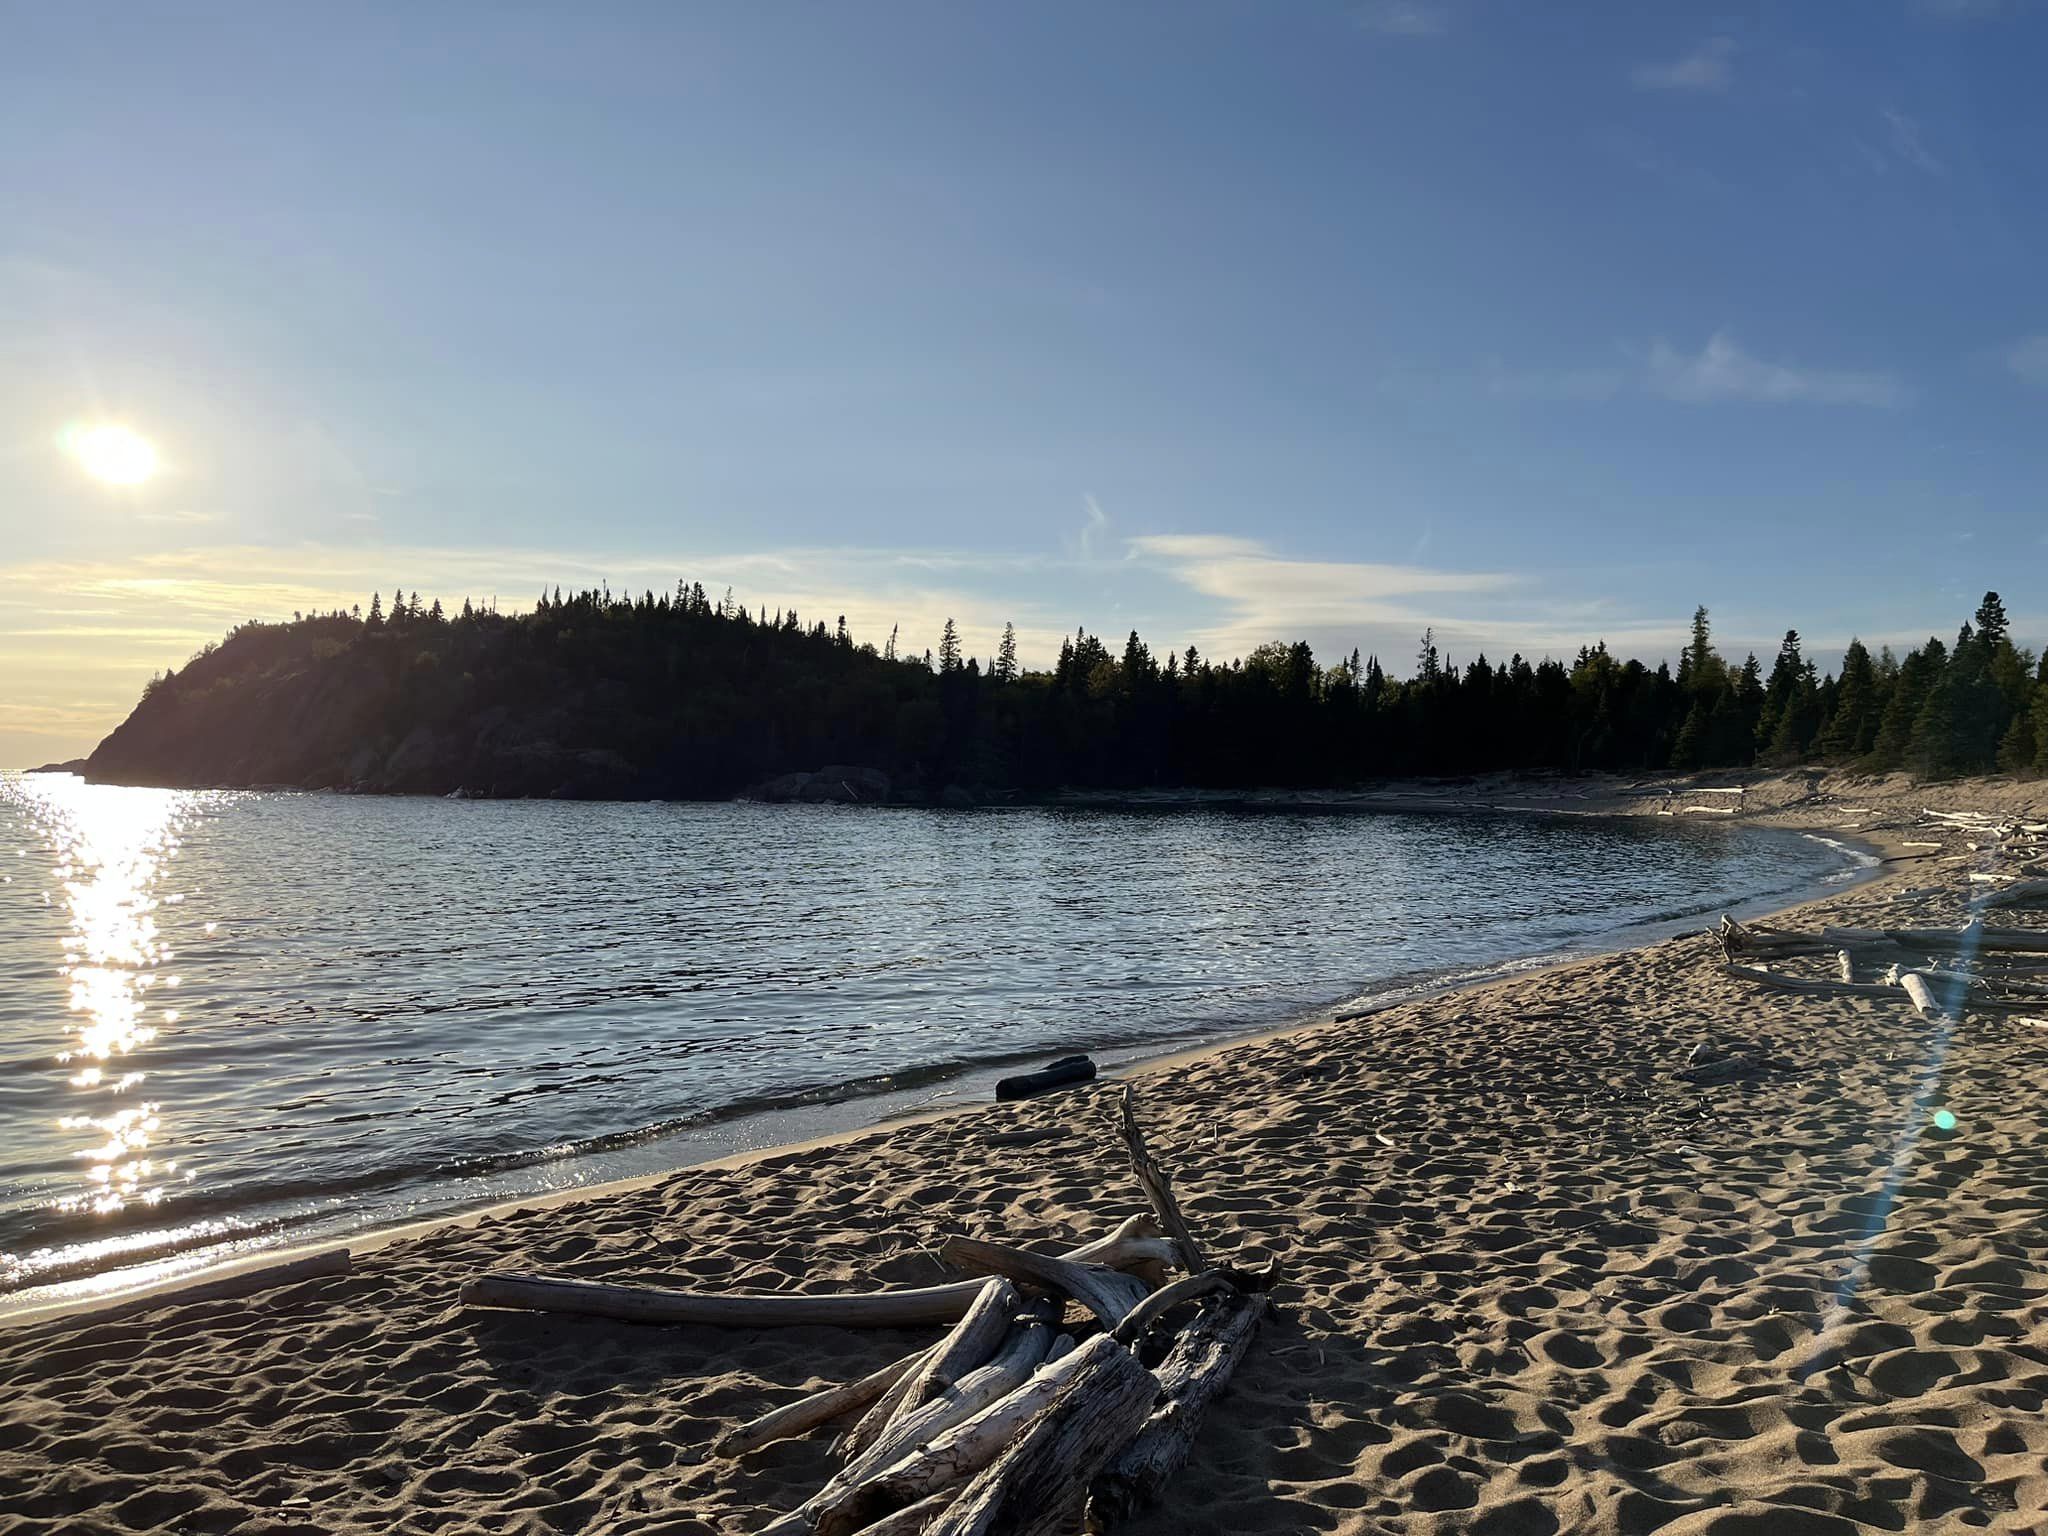 A sandy beach on Lake Superior; the sun is low and the lake is reflecting the very blue sky and bright gold sunlight. There are silhouettes of trees on the bank in the distance.